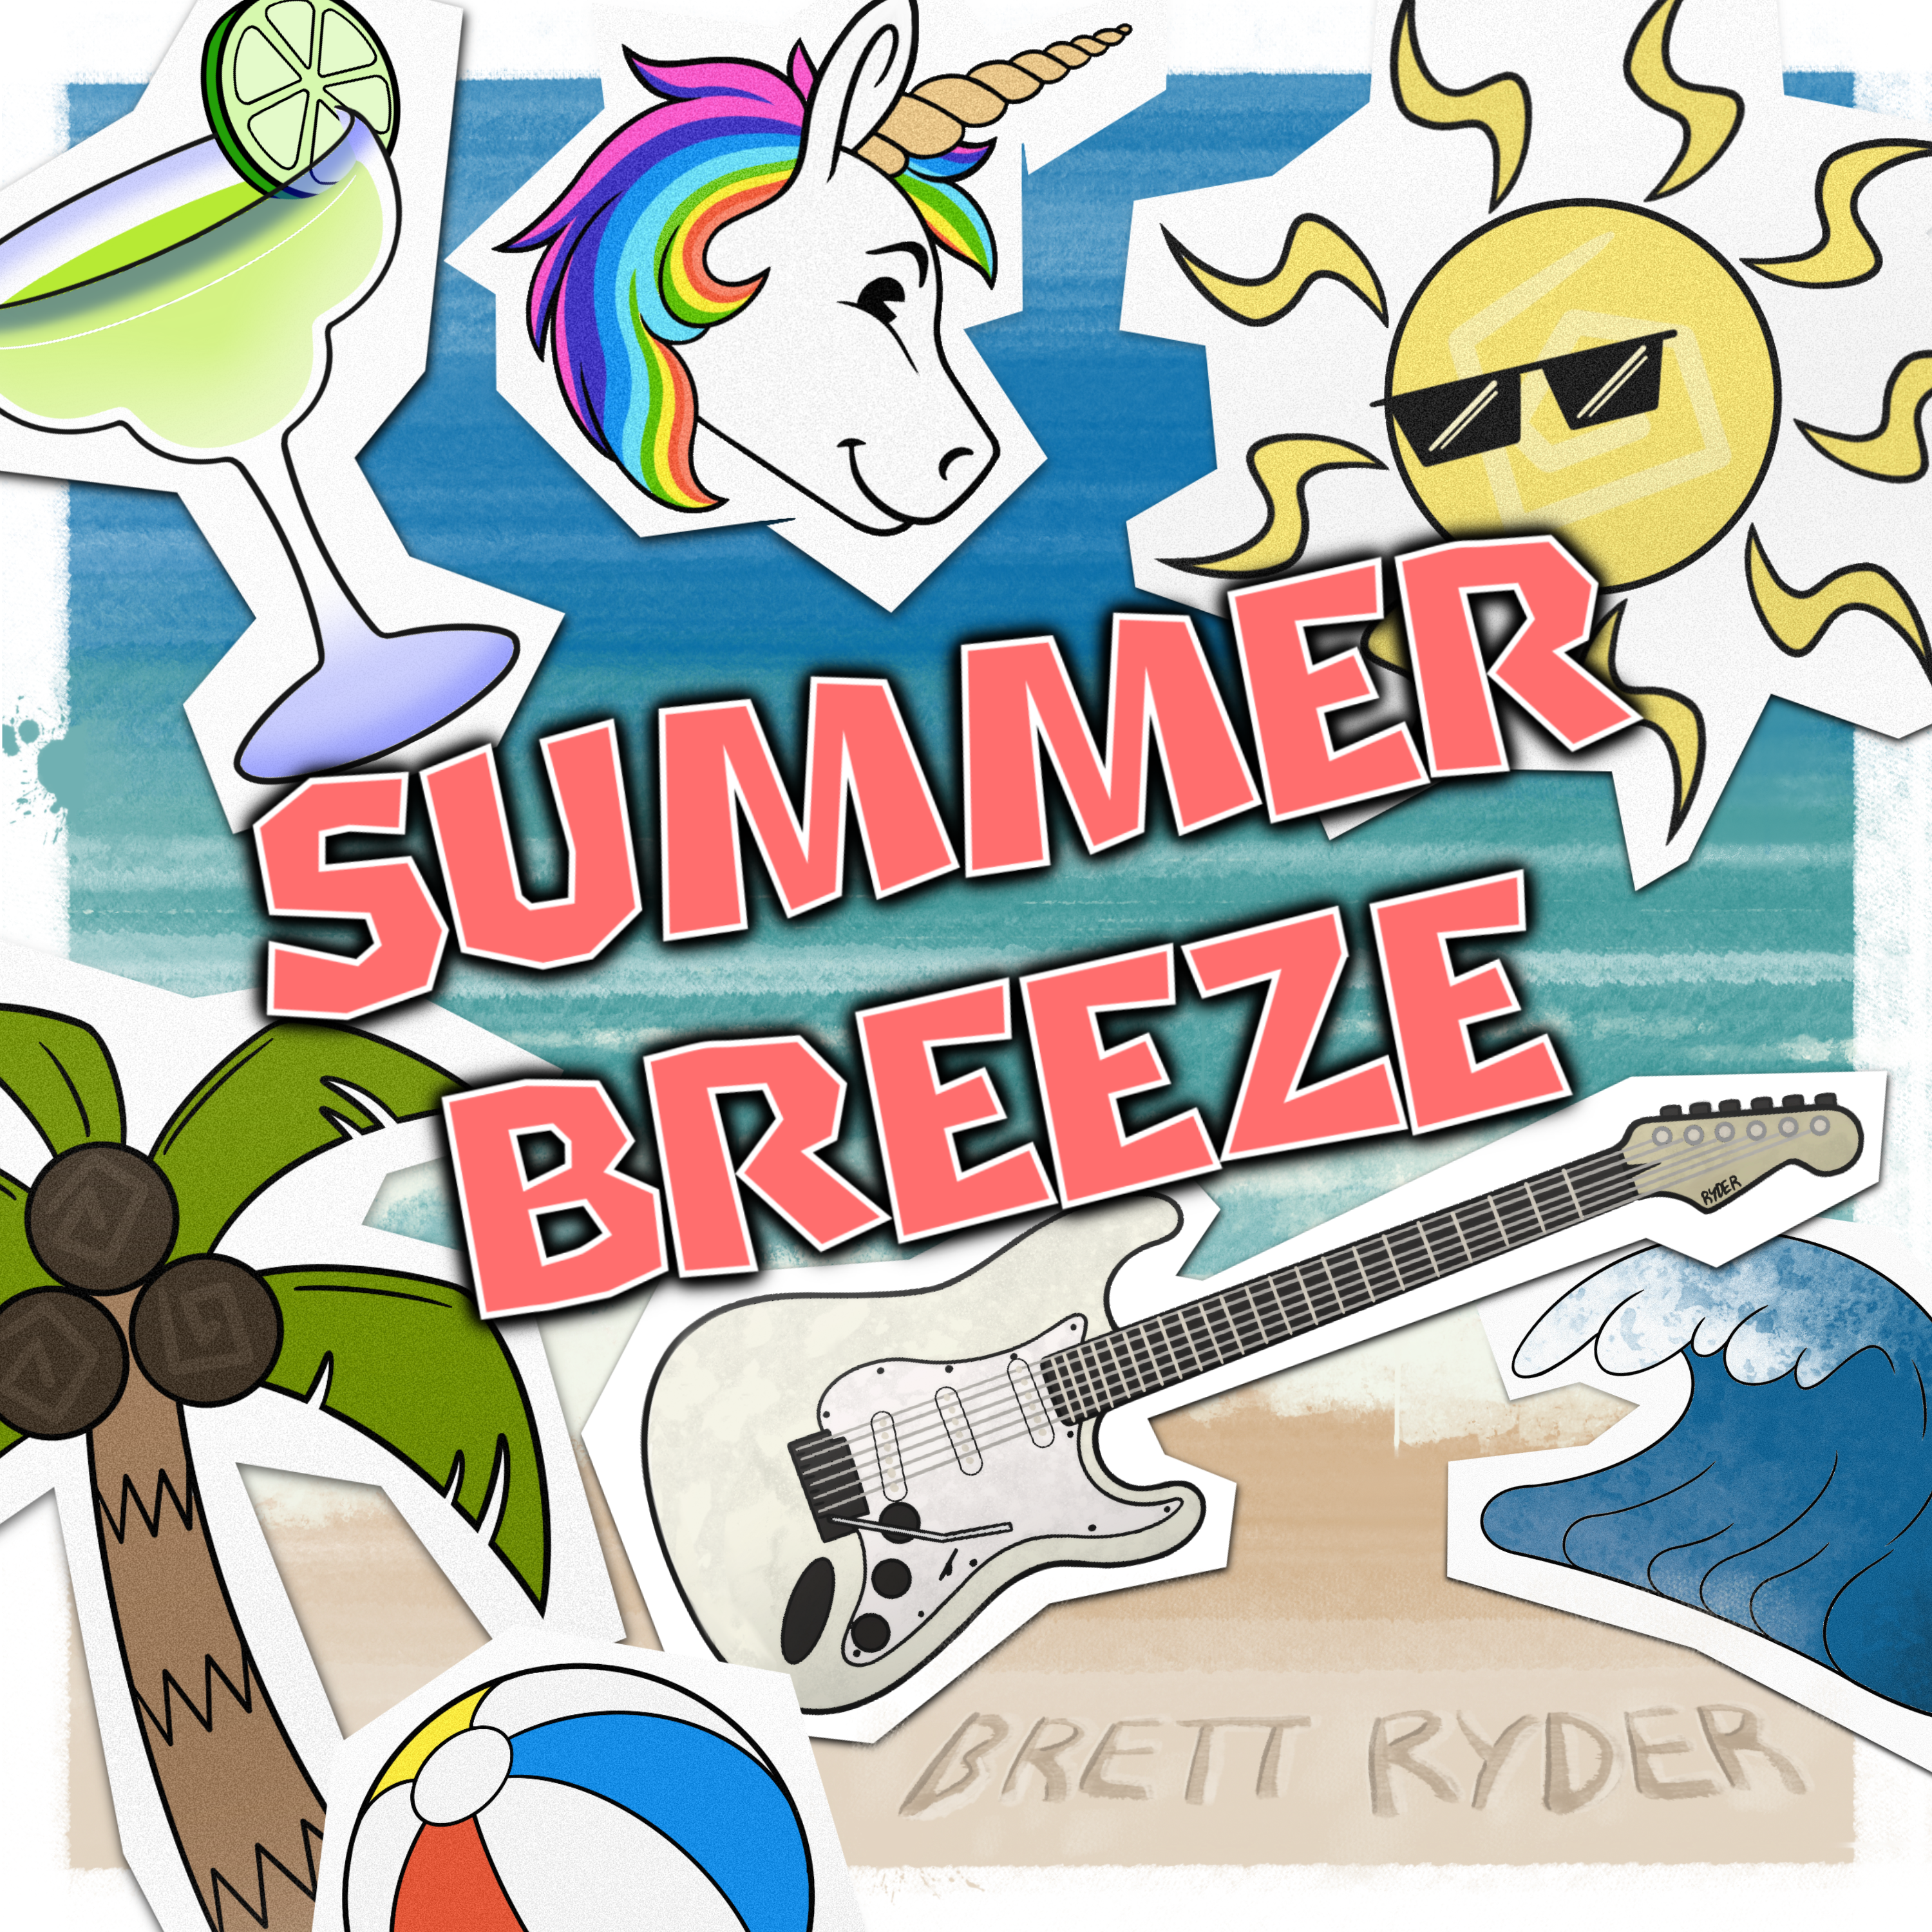 Slide into Summer with the Top 35 Most Iconic Songs of The Season, featuring Atlanta’s own Brett Ryder debuting his Hip-Hop Pop Single "Summer Breeze"